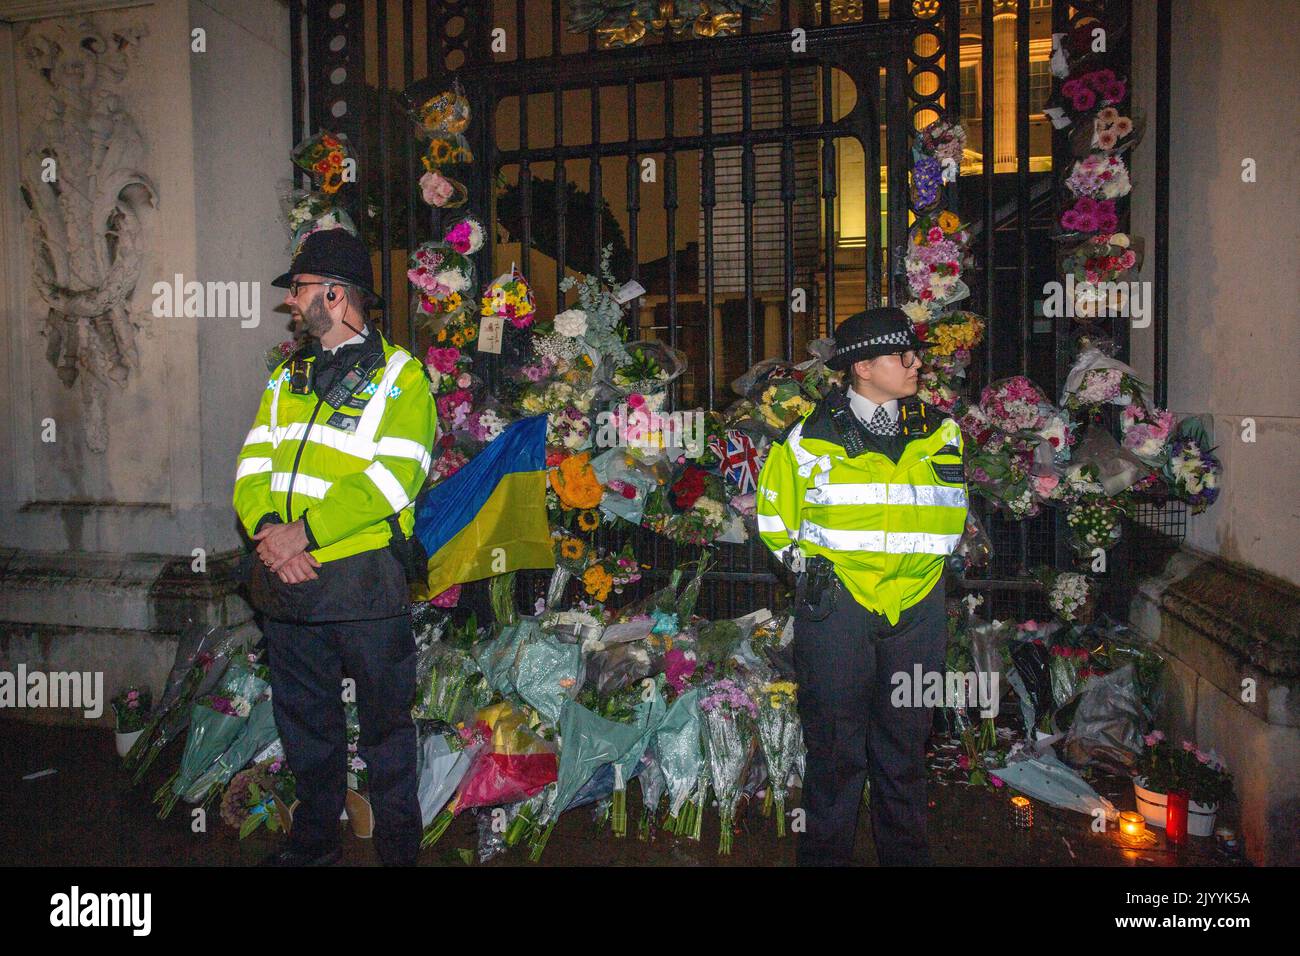 LONDON, ENGLAND - SEPTEMBER 08: Members of the public begin to gather outside Buckingham Palace to lay flowers and pay their respects following the death today of Queen Elizabeth ,Credit: Horst A. Friedrichs Alamy Live News Stock Photo